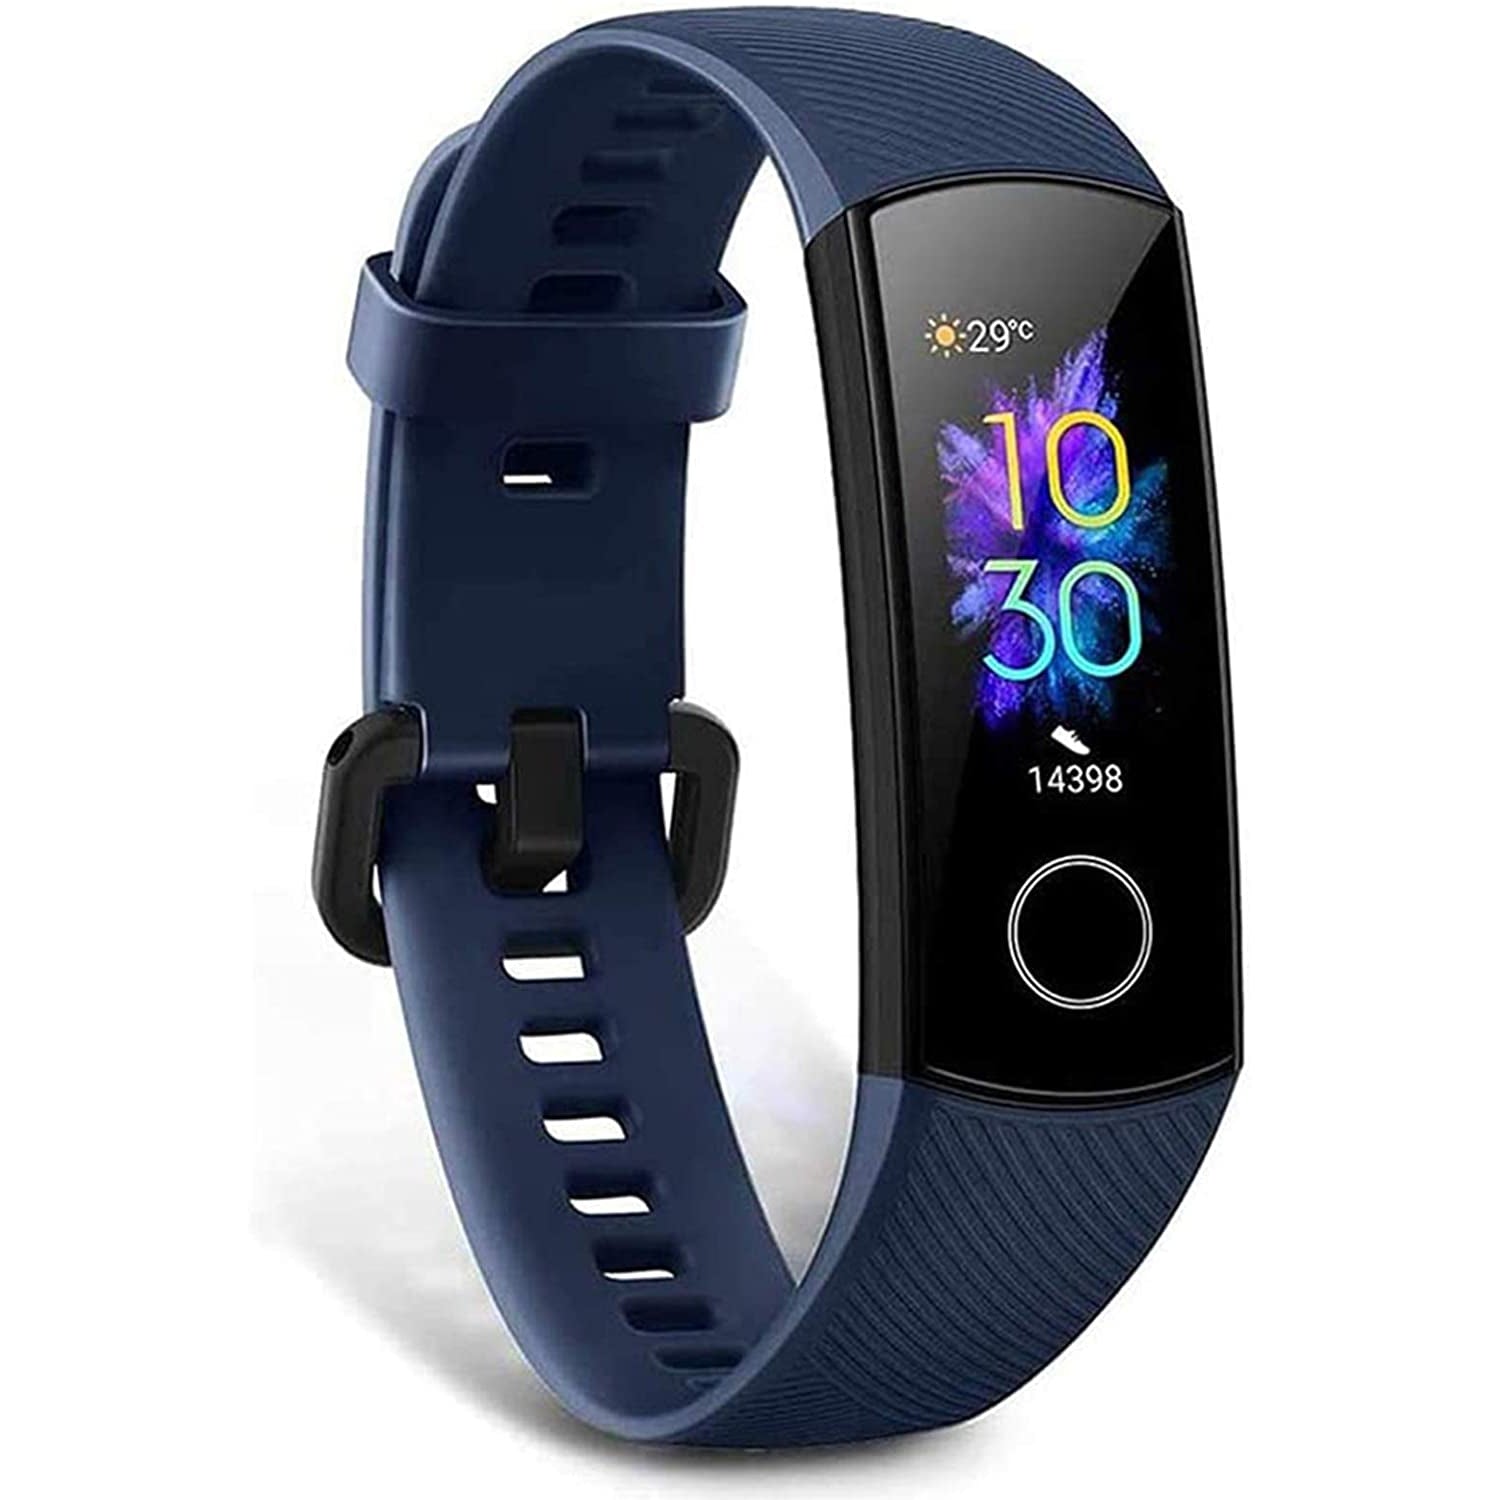 HONOR Band 5 Fitness Tracker with SpO2 Heart Rate and Sleep Monitor - Blue- Refurbished Pristine